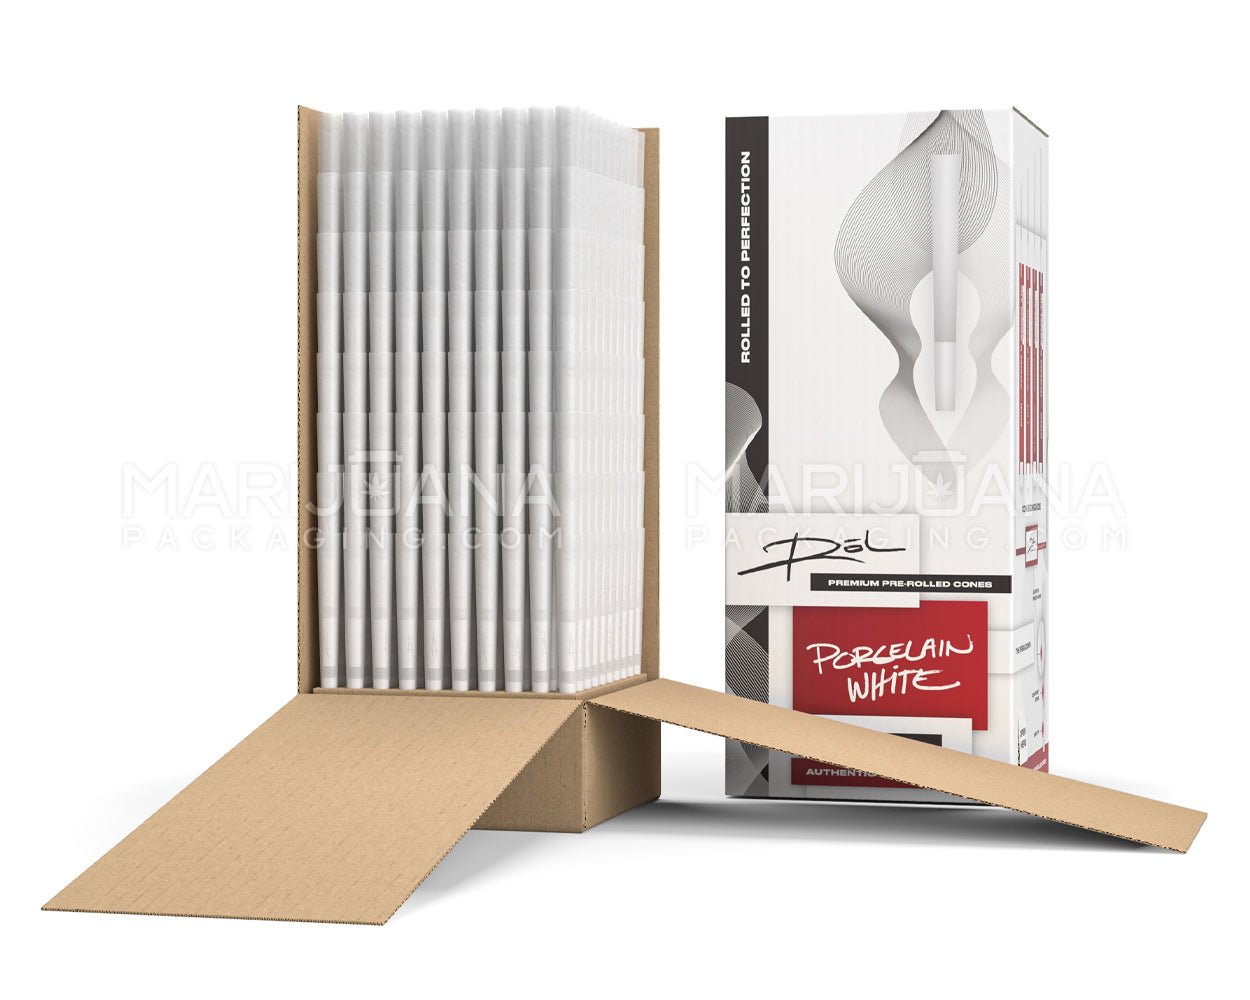 RōL | King Size Pre-Rolled Cones | 109mm - Porcelain White Paper - 800 Count - 4